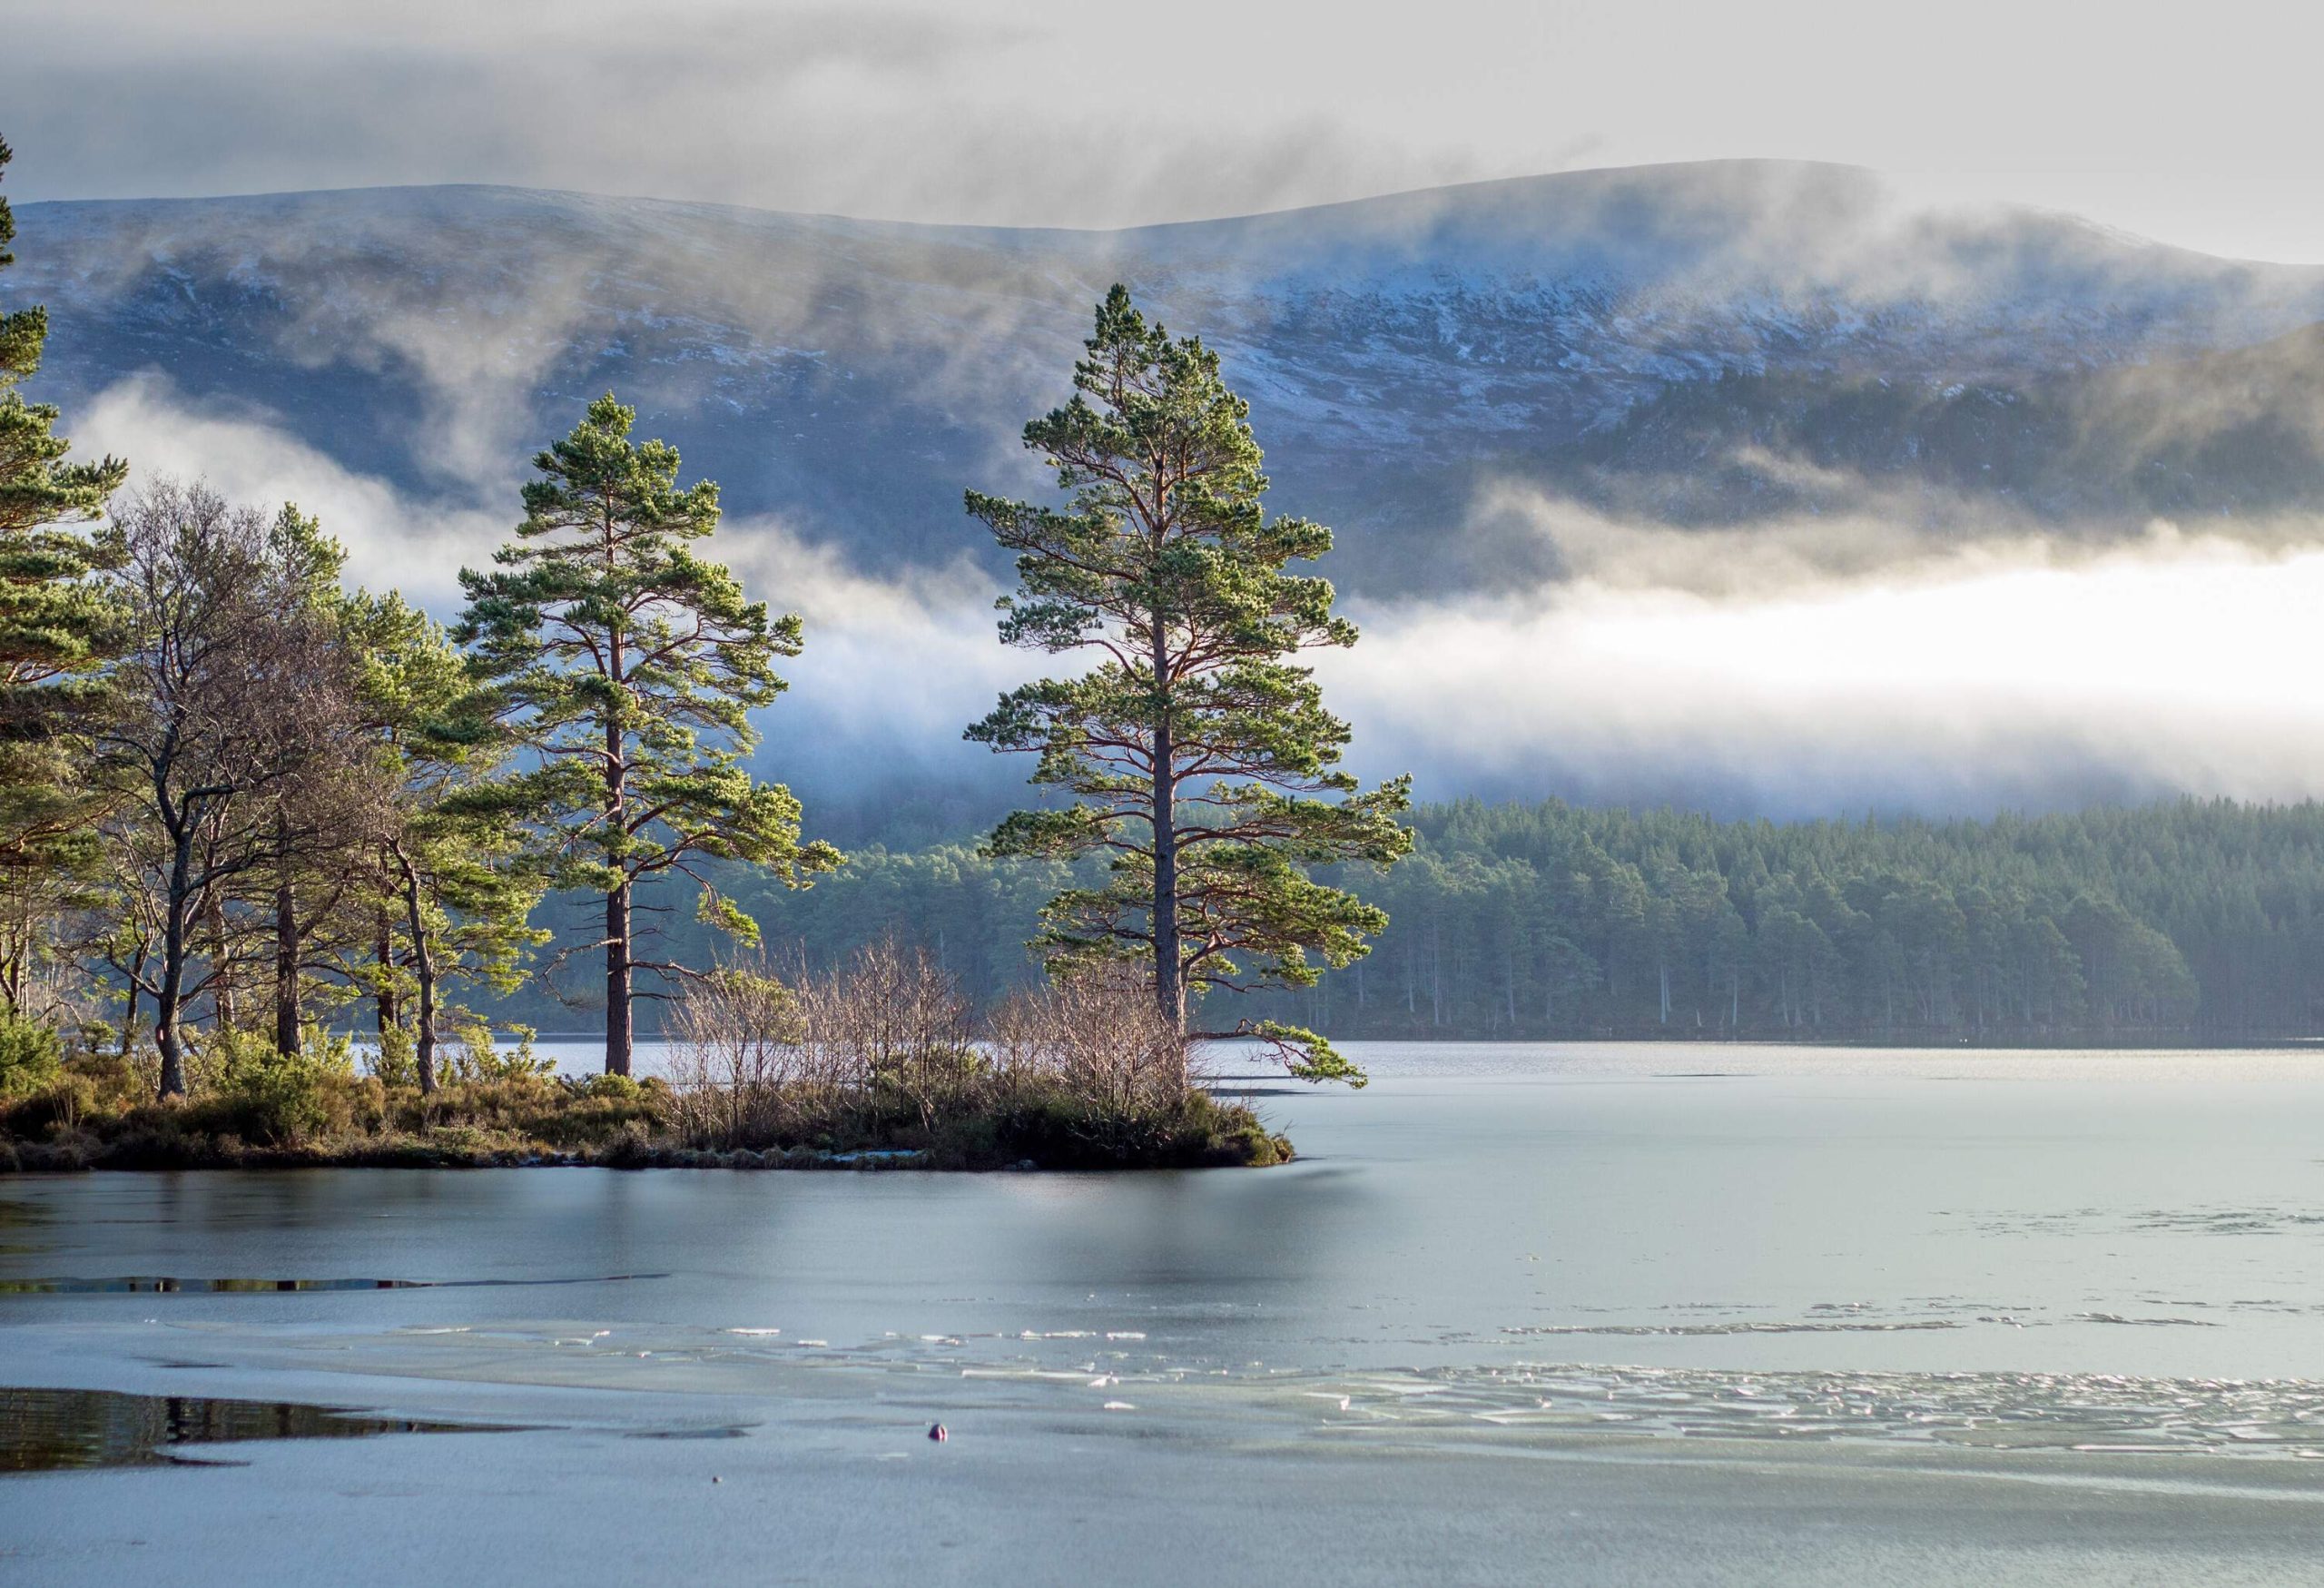 Trees at the centre of an icy lake with views of a misty forest at the base of a mountain.